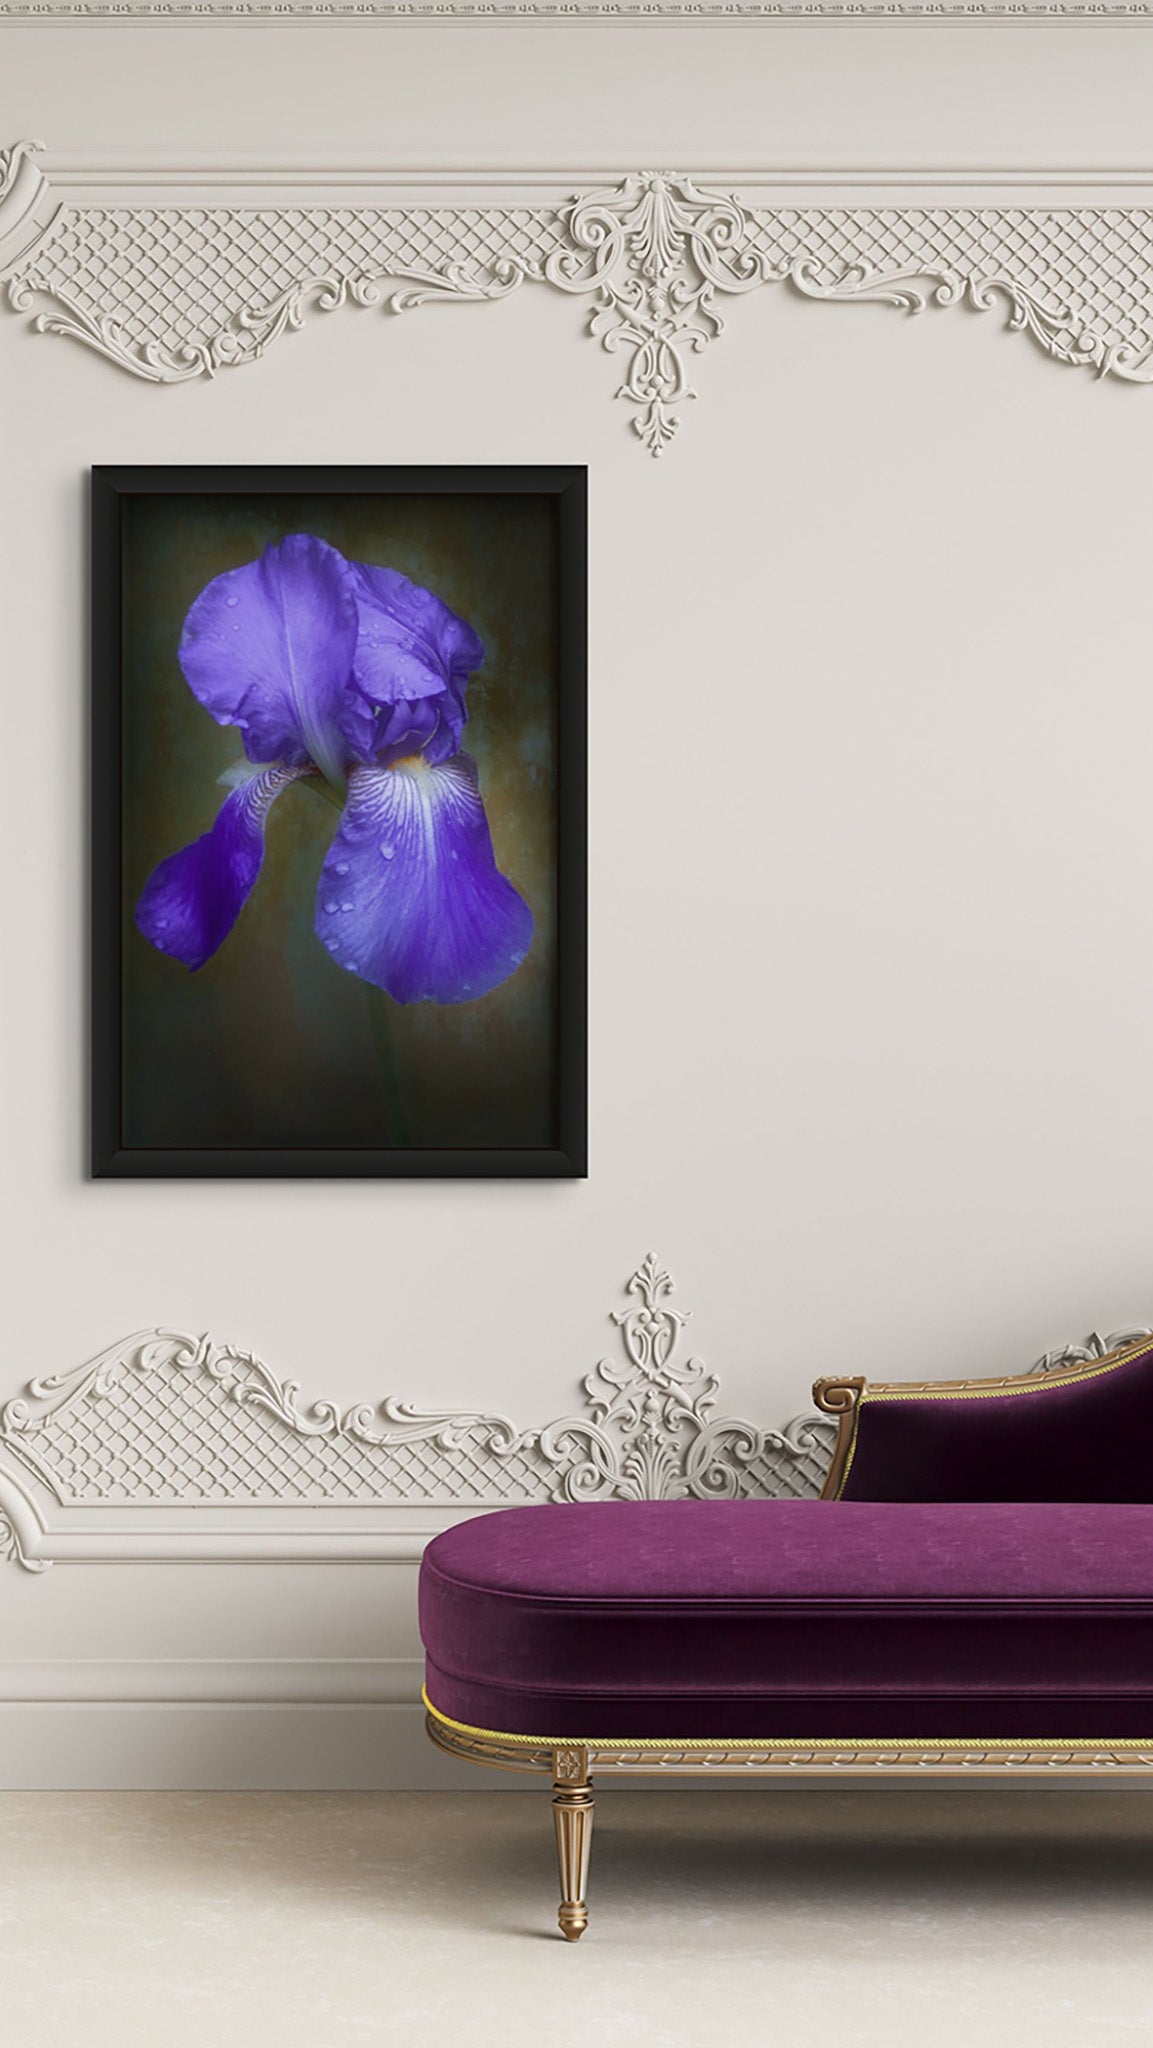 Picture hanging on the wall of room with luxury sofa. The picture on the wall is a fine art photograph of an Iris flower titled "Righteous" by Cameron Dreaux of Dreaux Fine Art. 